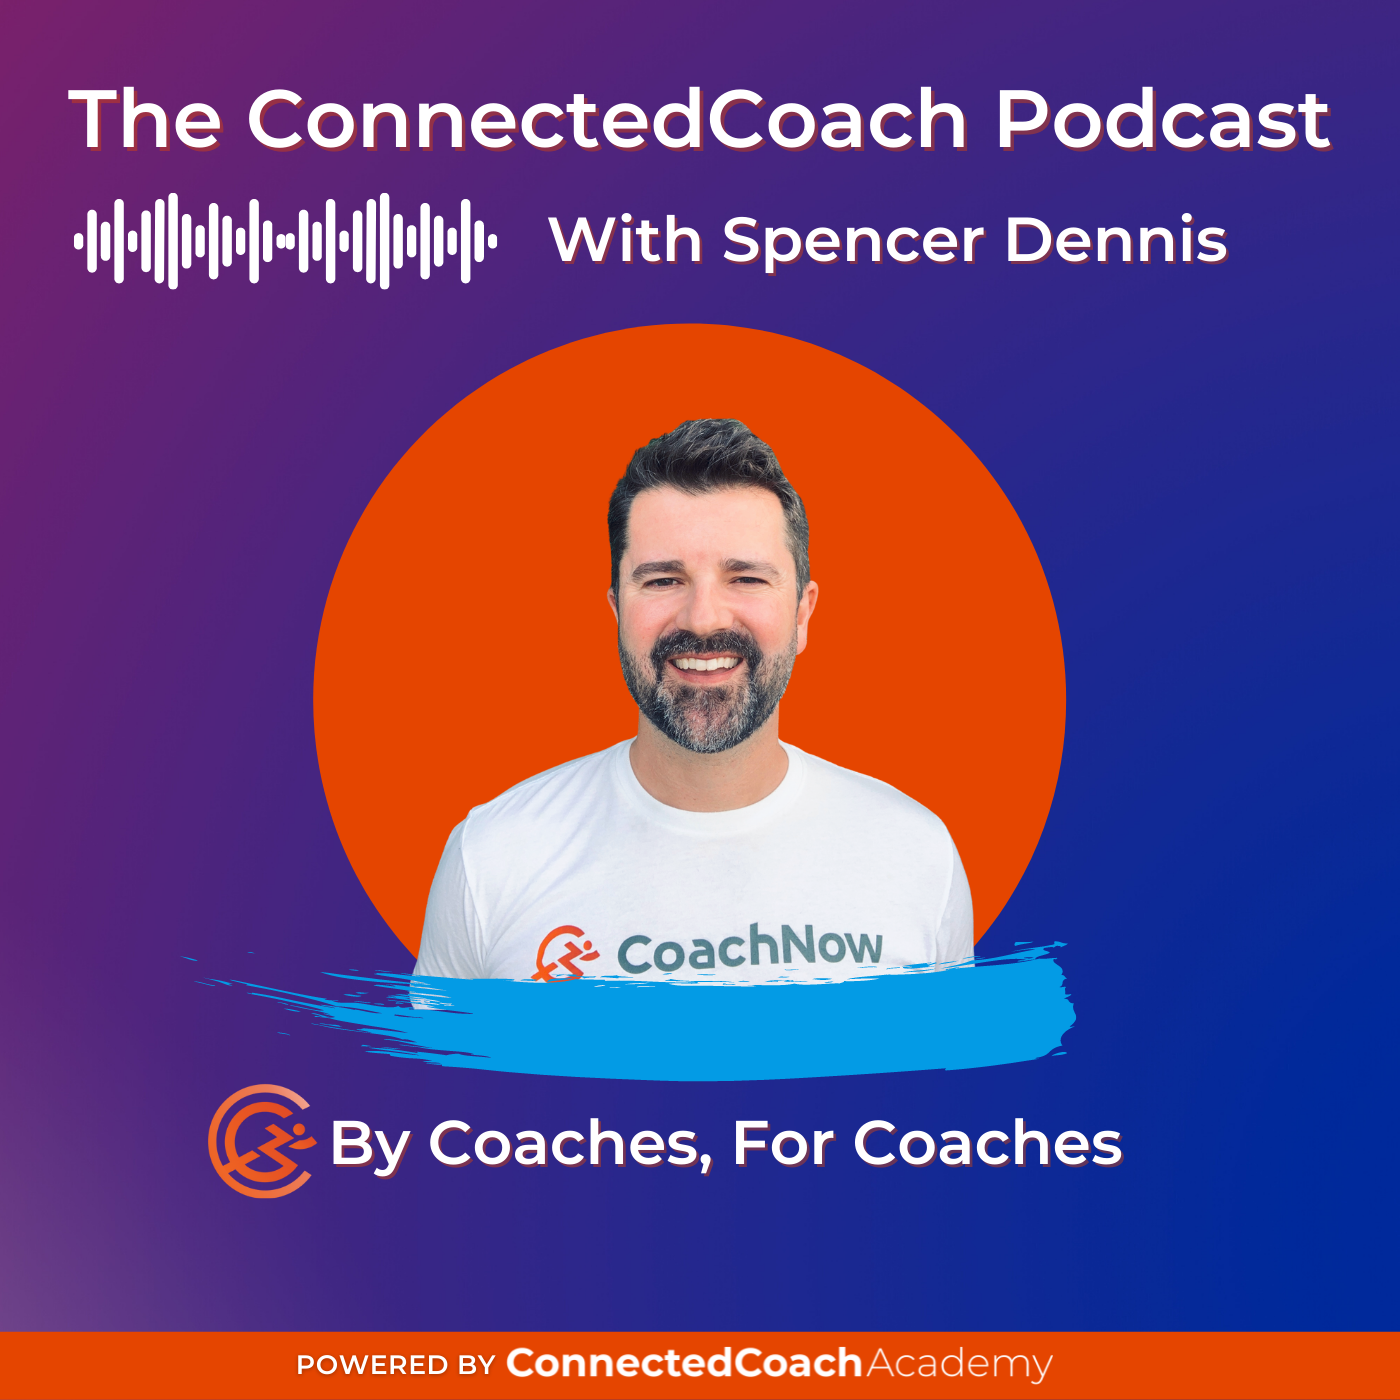 [Announcement] The ConnectedCoach Podcast